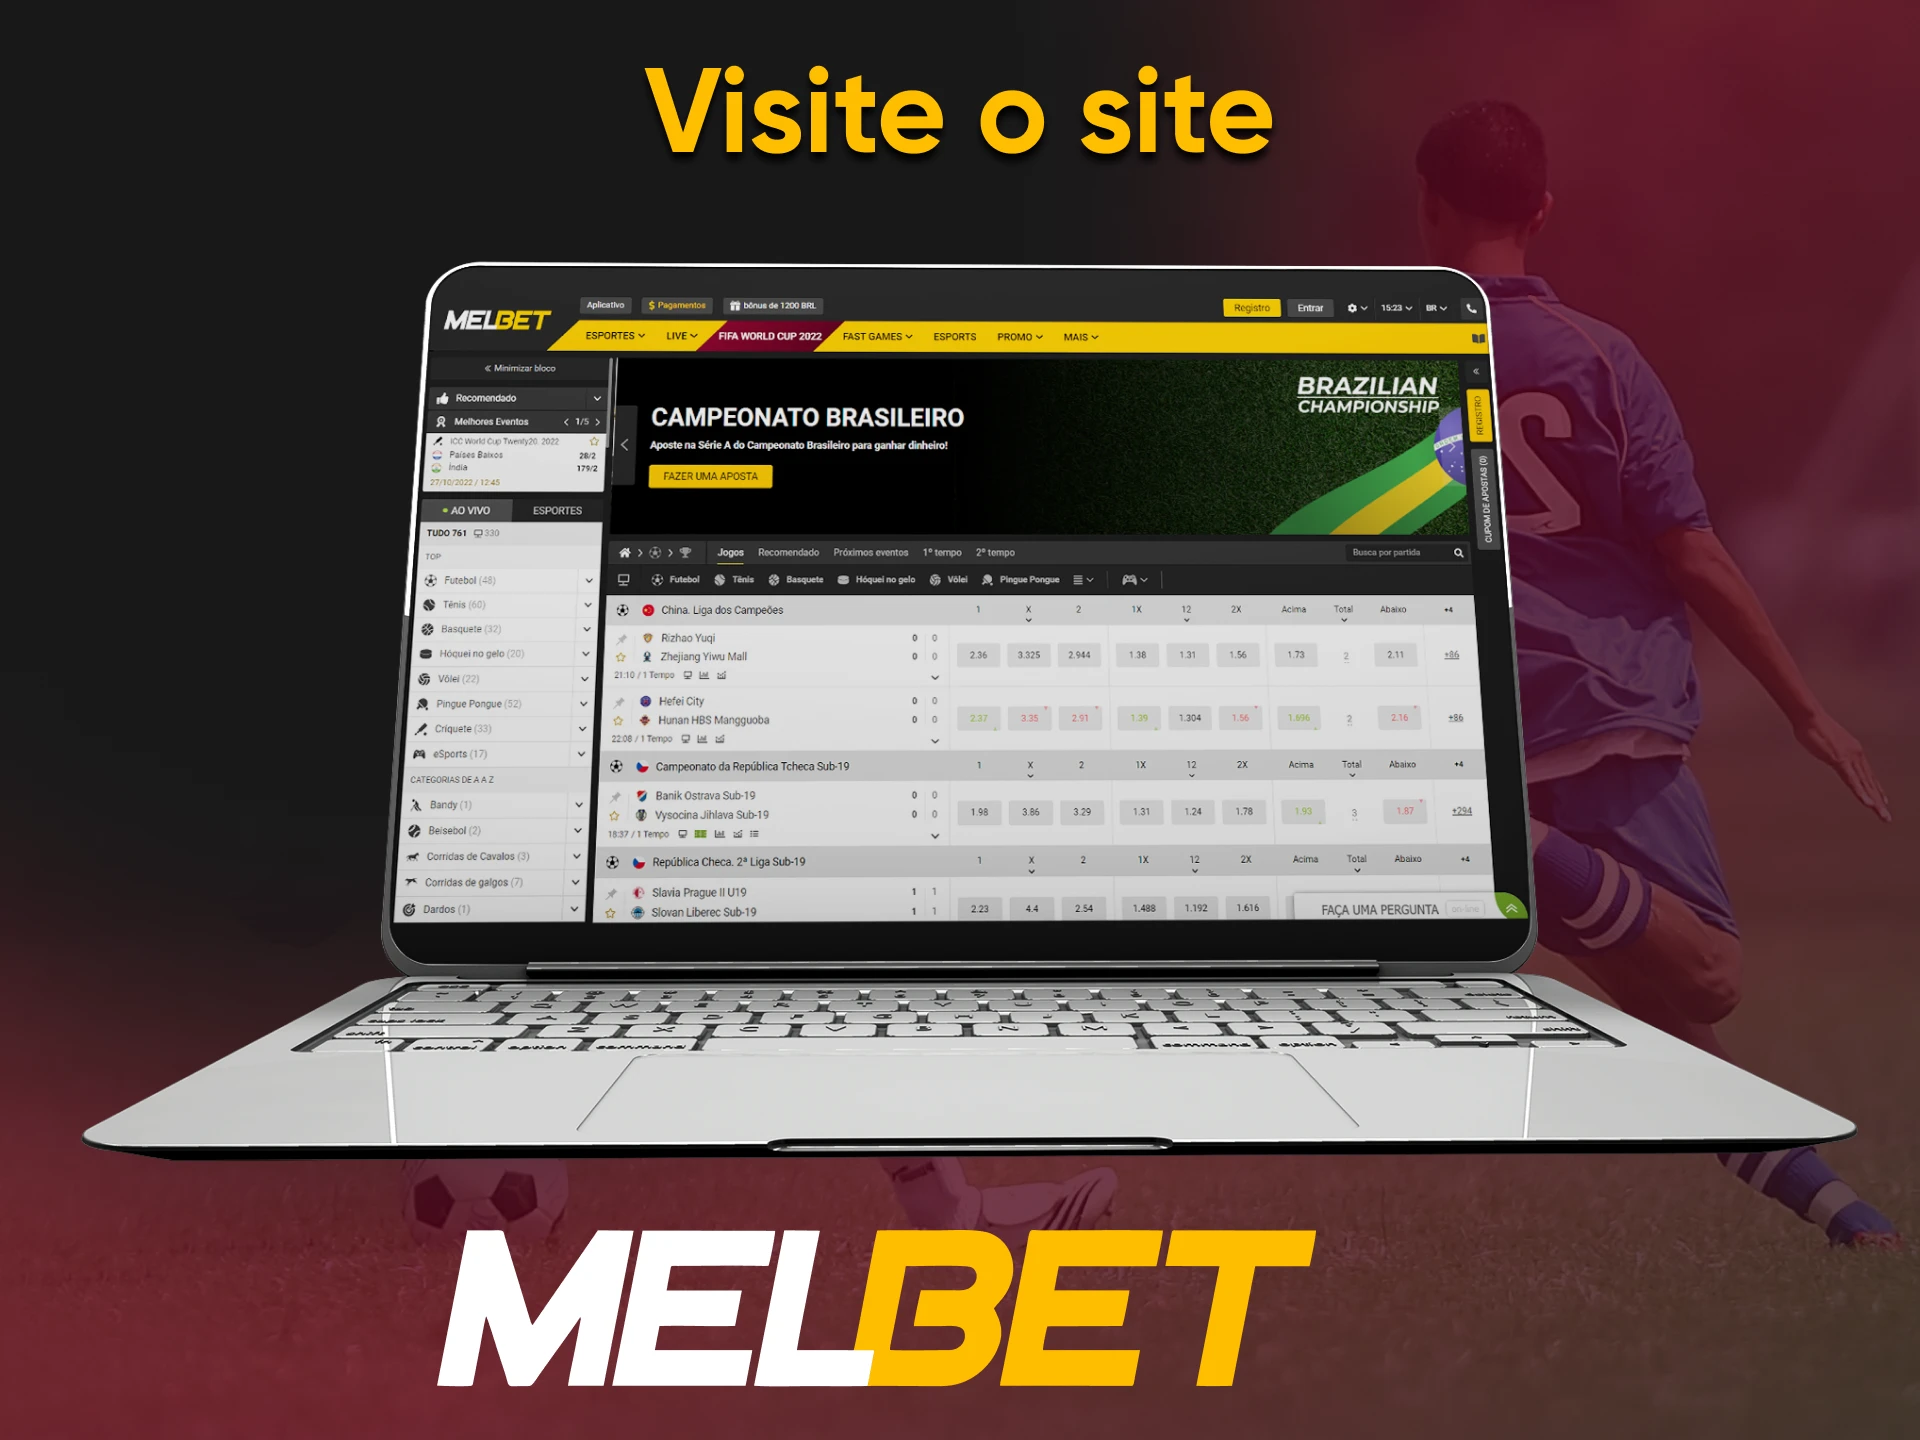 If you need to make a deposit, register with Melbet.